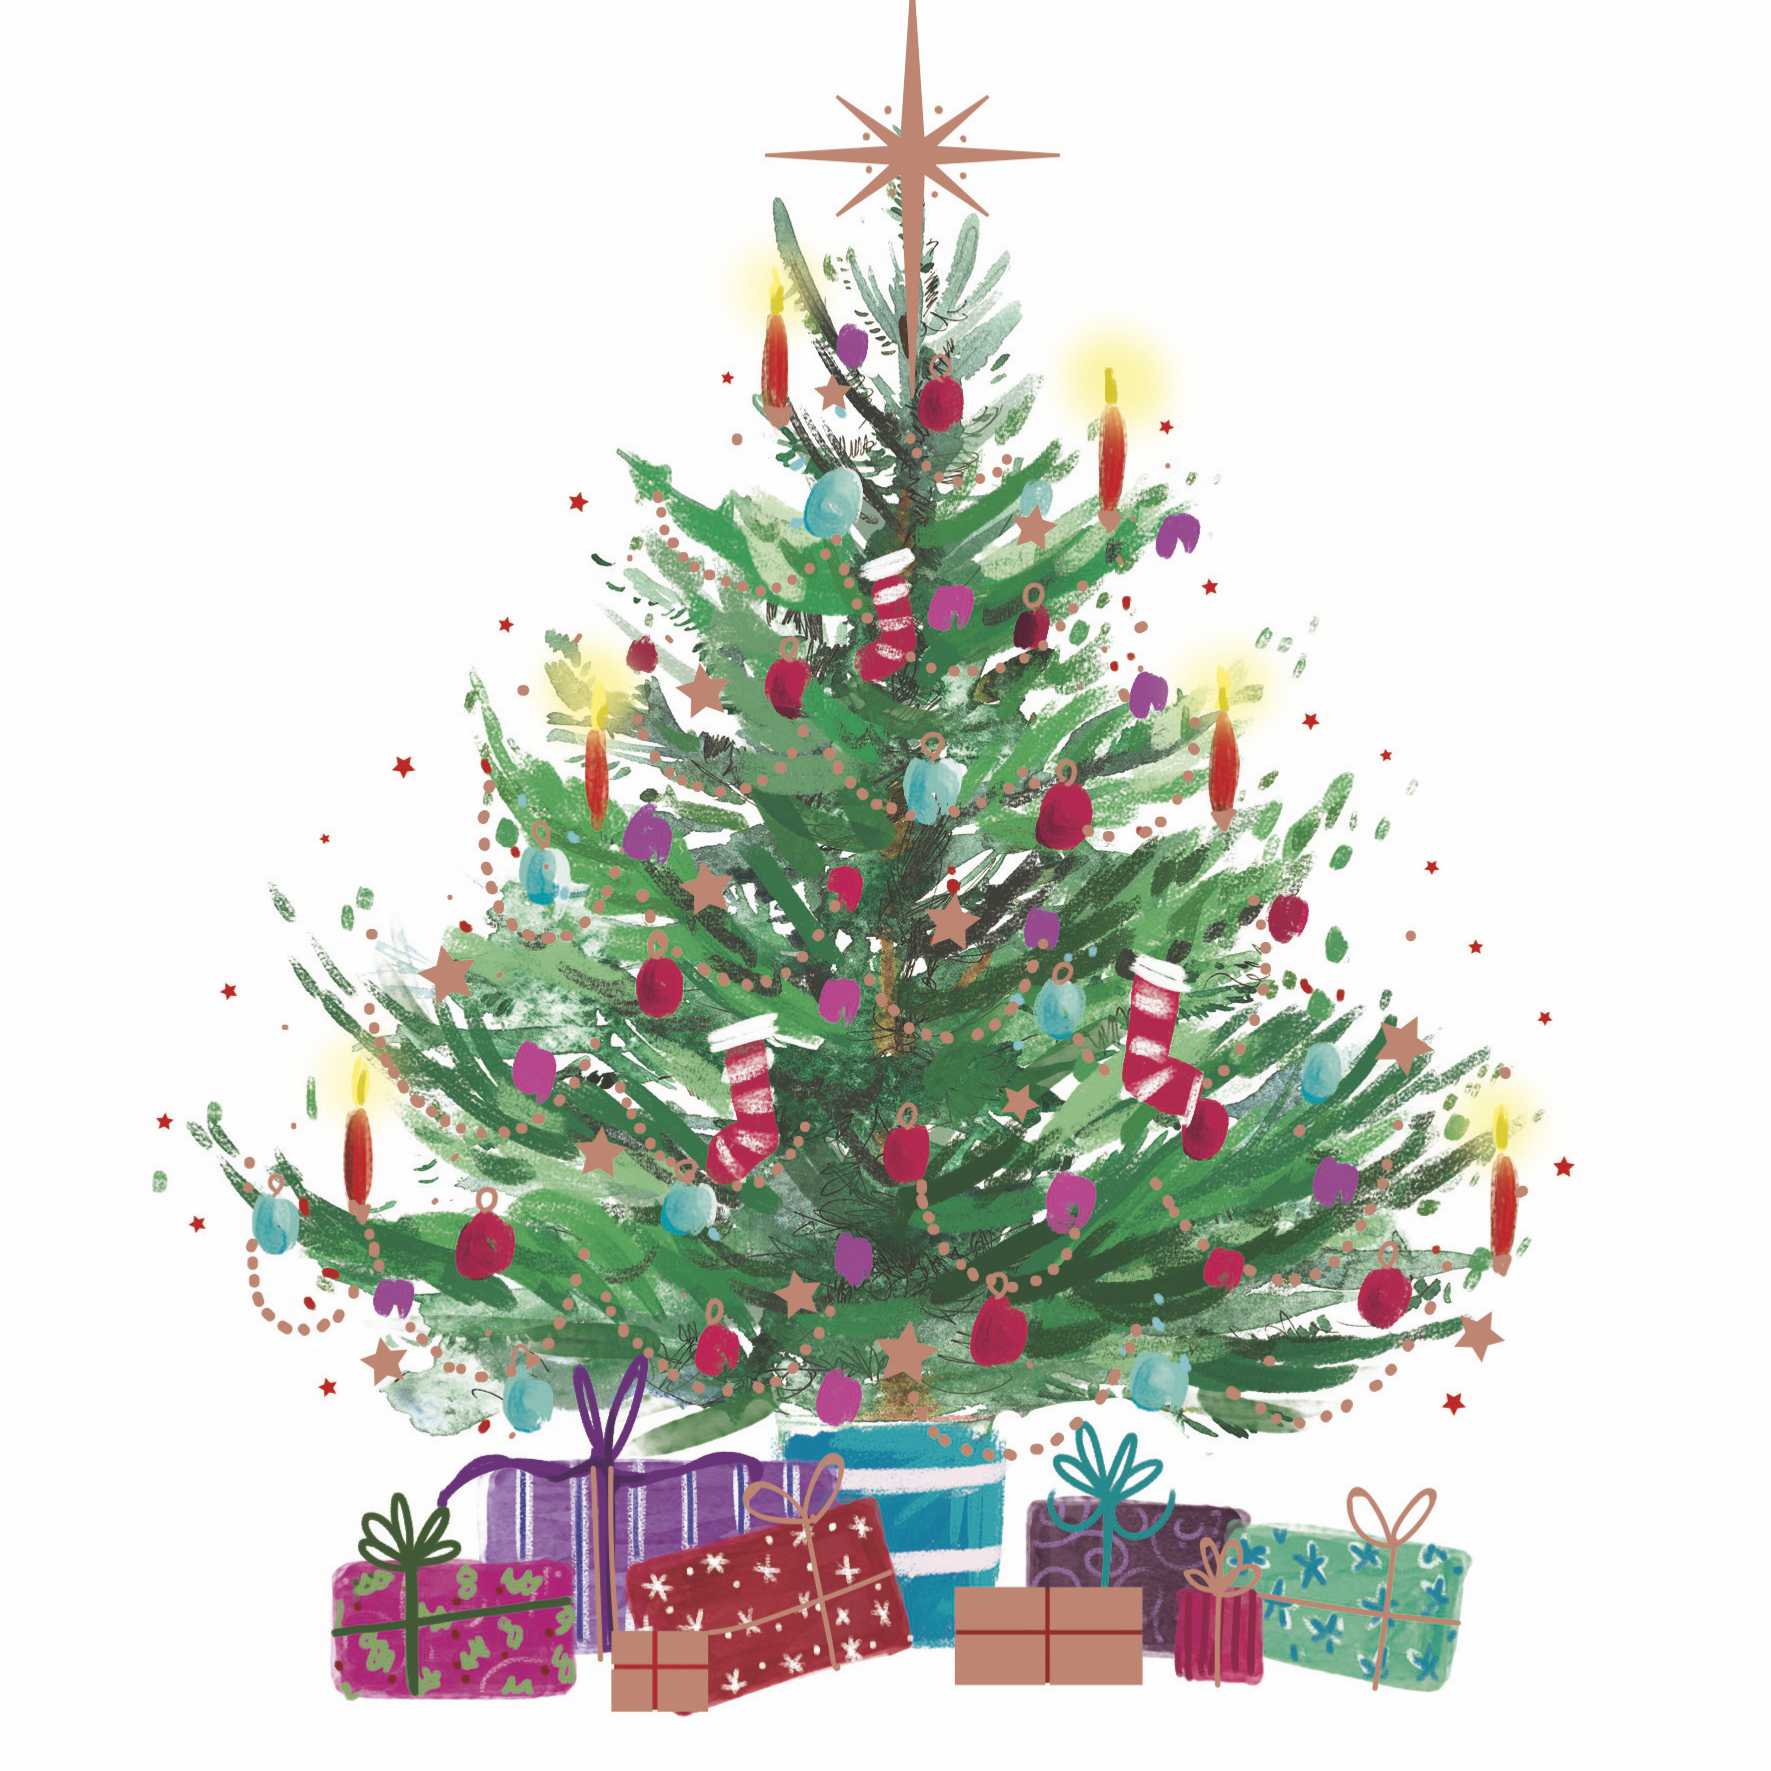 The design shows an colourful illustrated Christmas tree and presents on a white background.